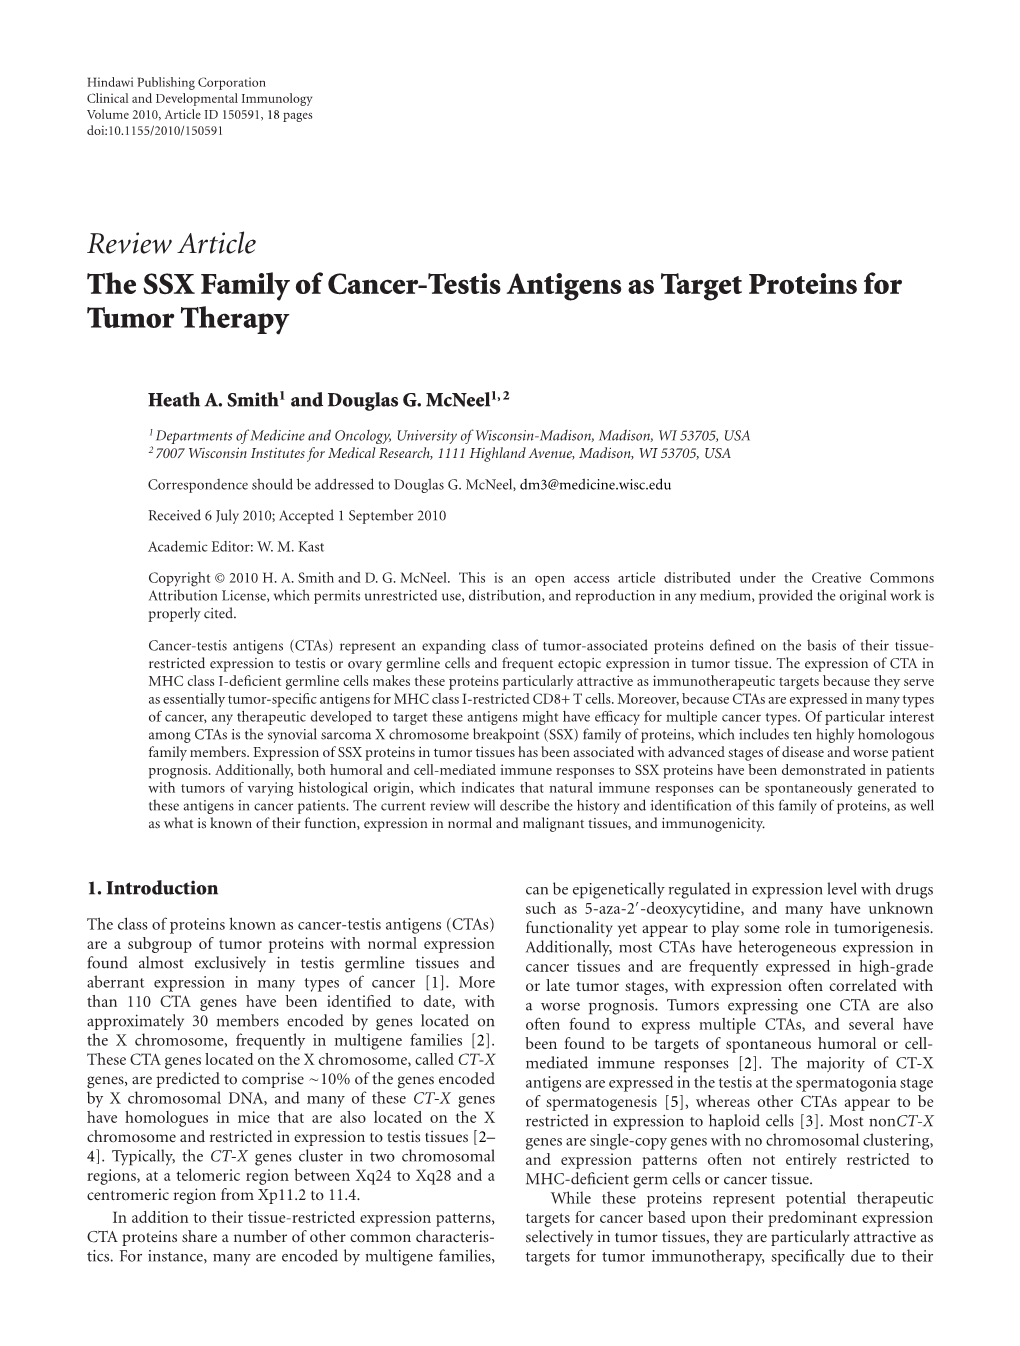 Review Article the SSX Family of Cancer-Testis Antigens As Target Proteins for Tumor Therapy